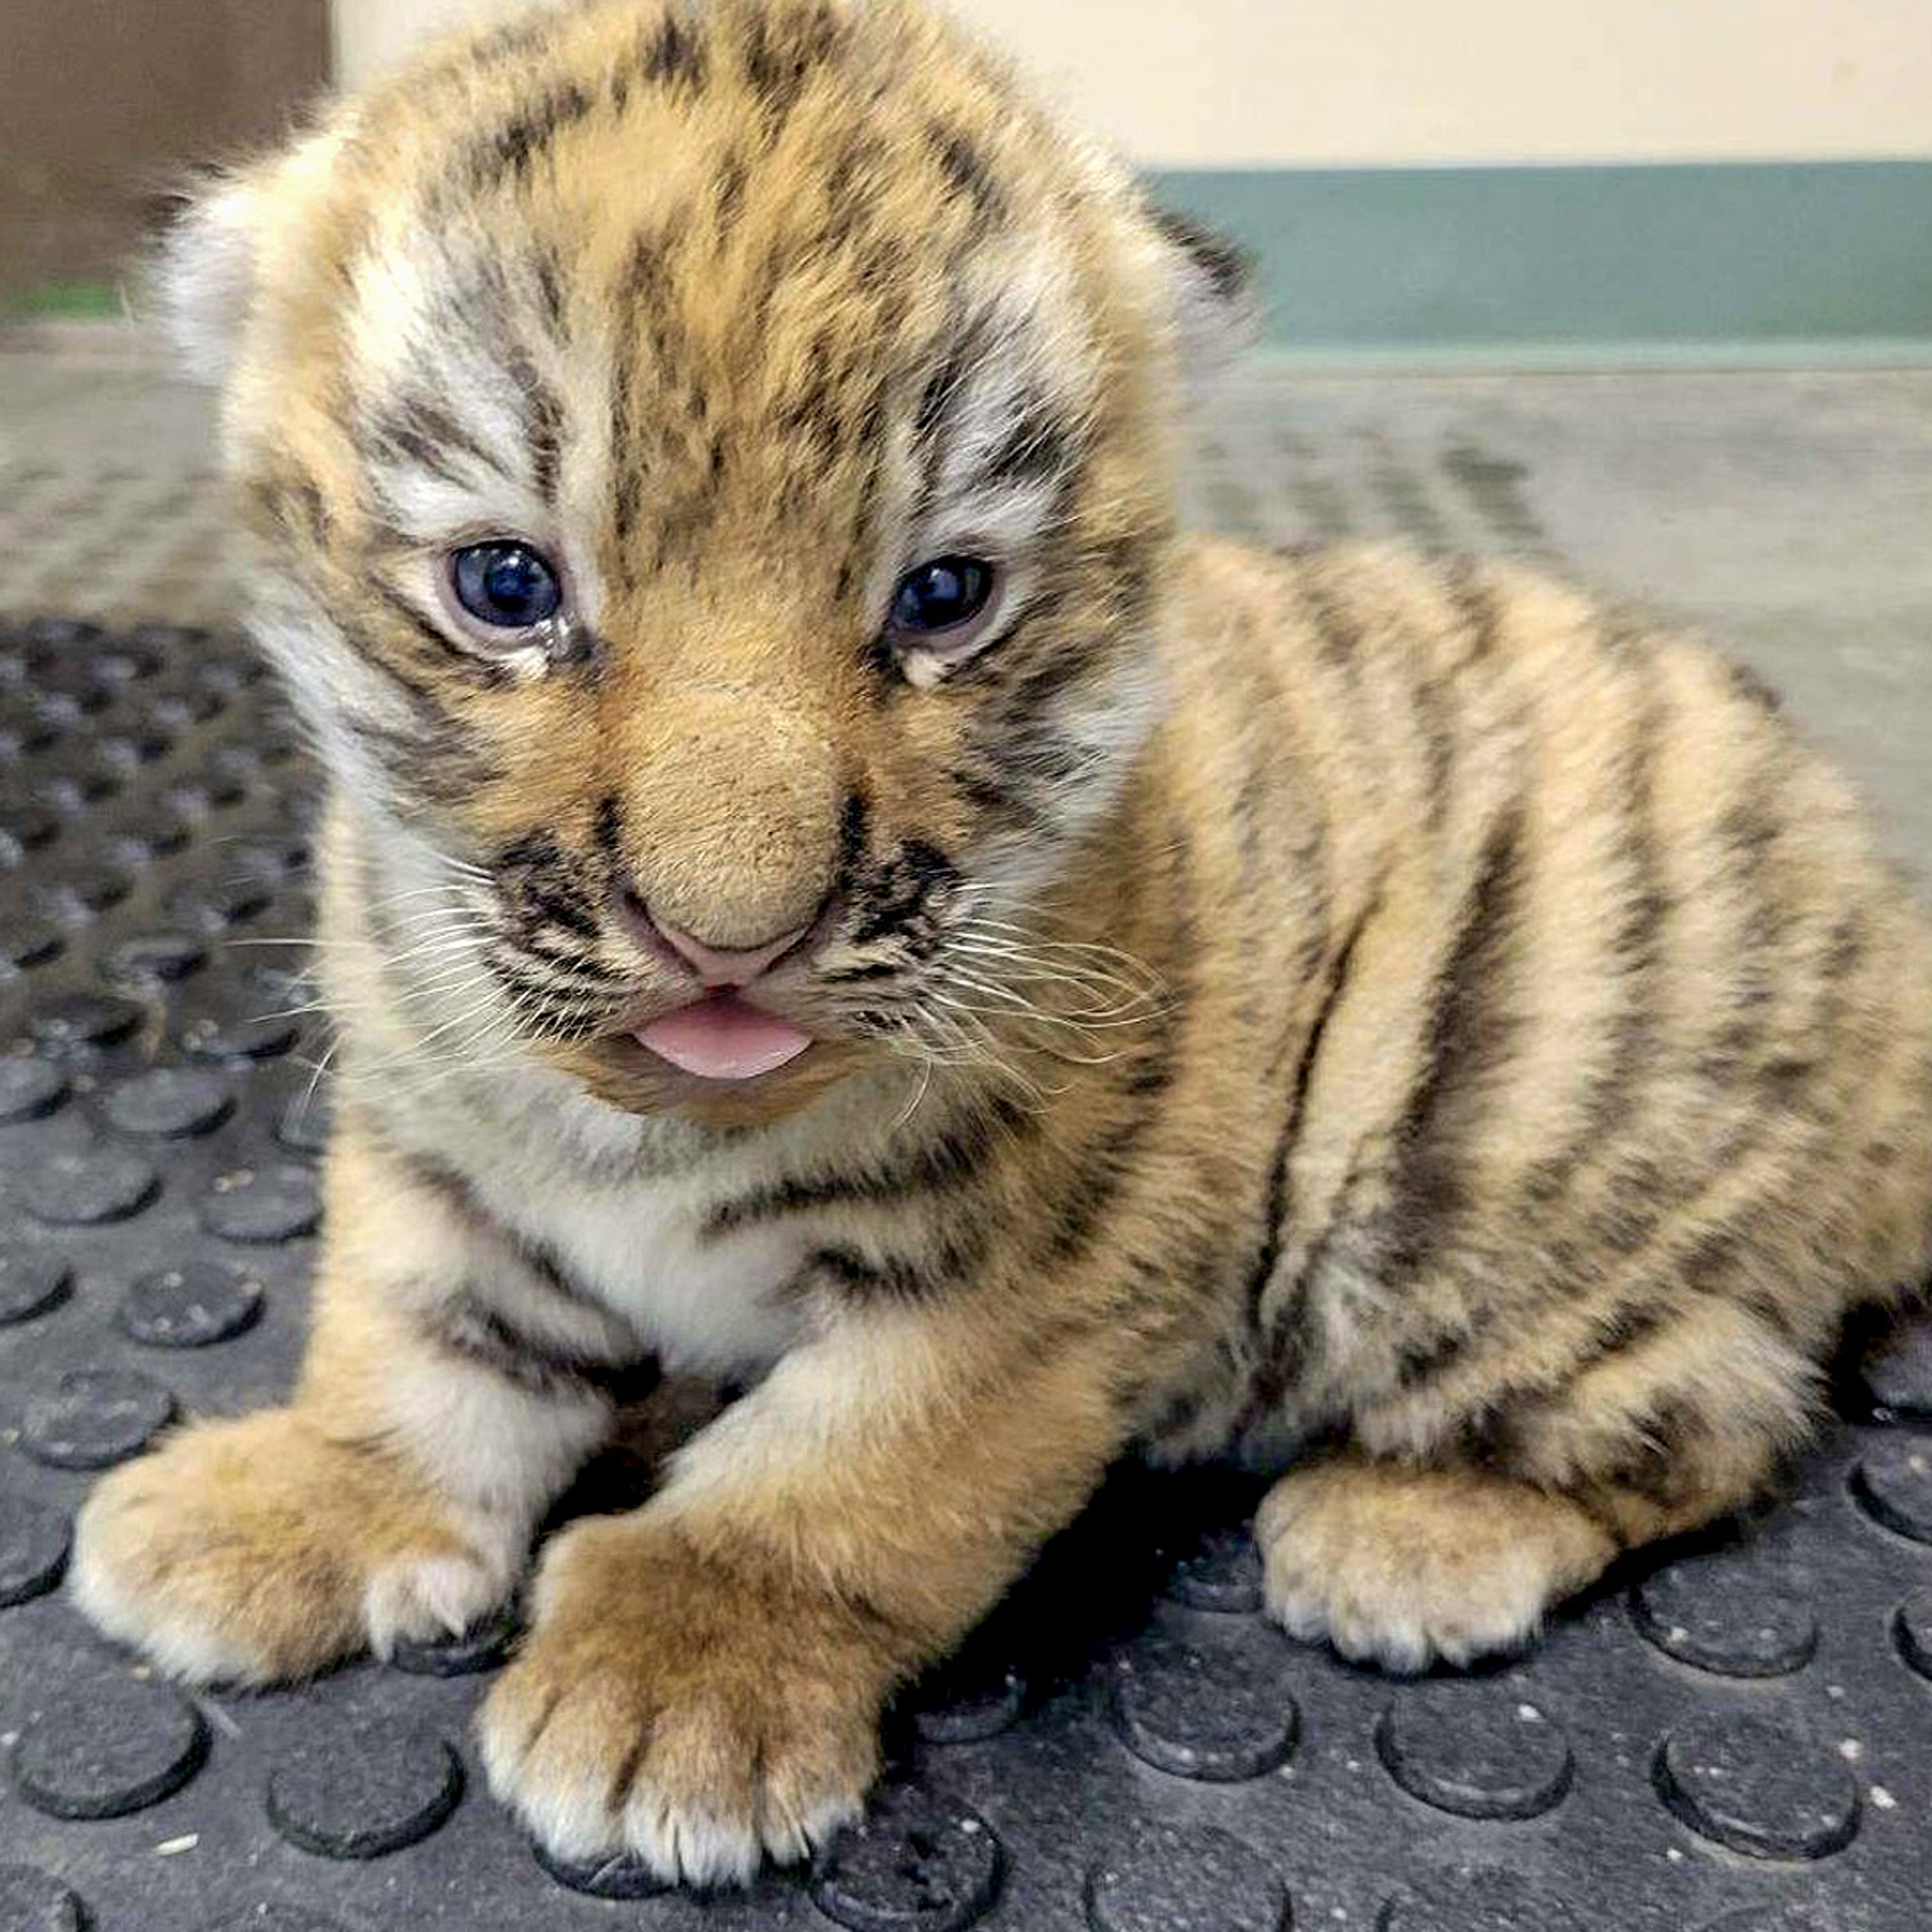 Syracuse zoo welcomes rare Amur tiger cubs (see new photos) 